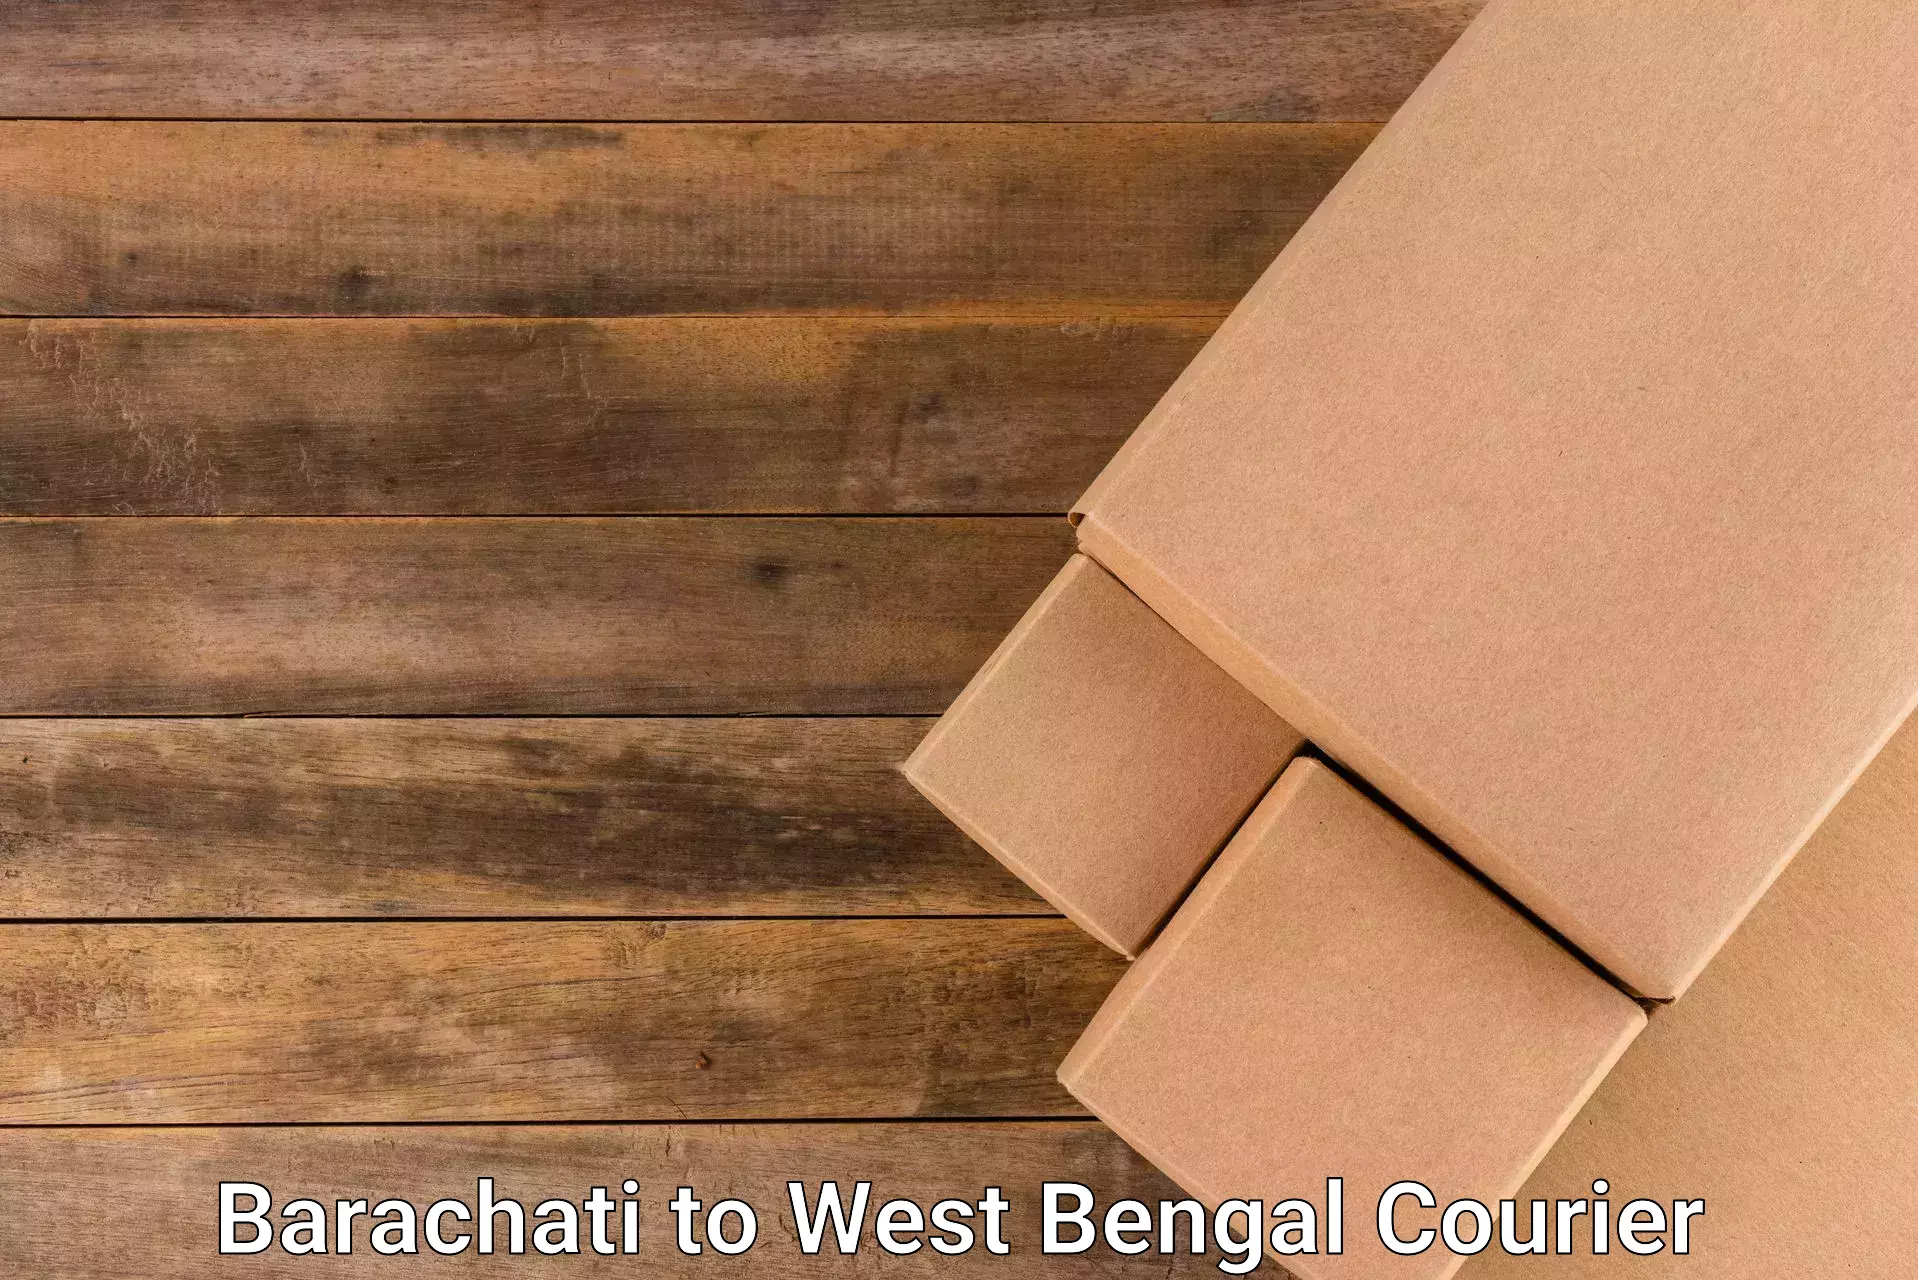 Efficient courier operations Barachati to South 24 Parganas